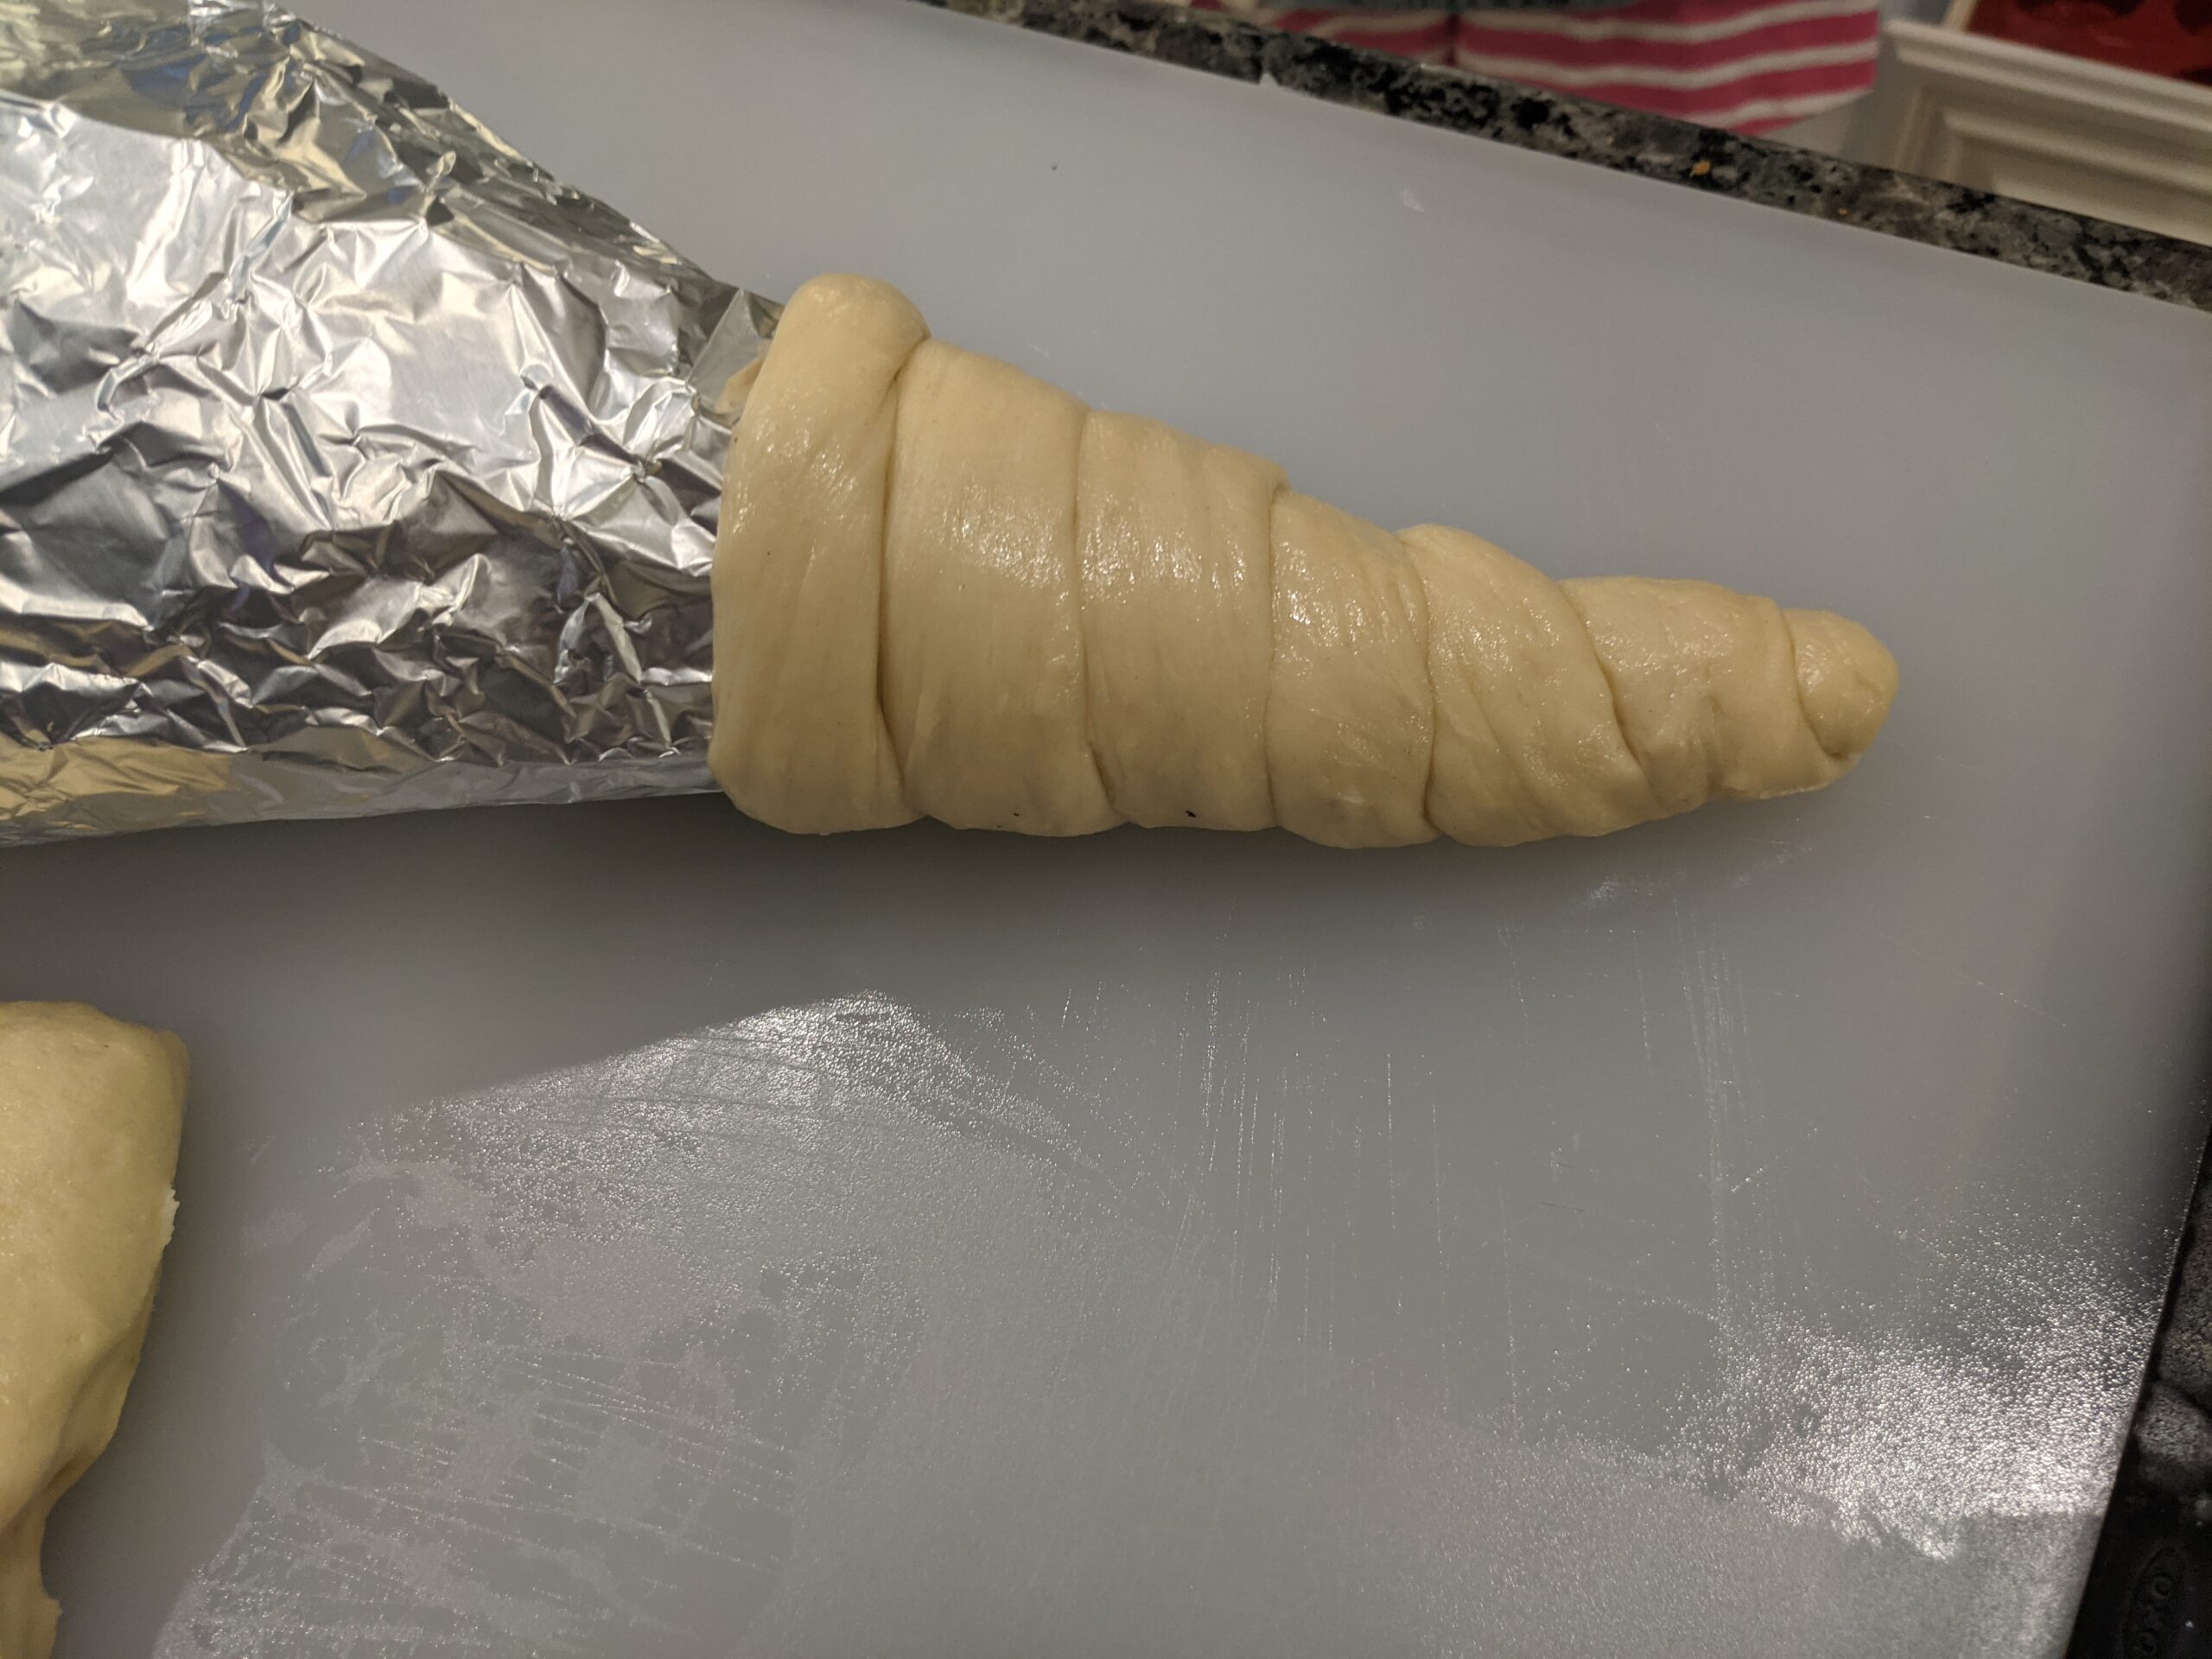 Dough rolled into a cone